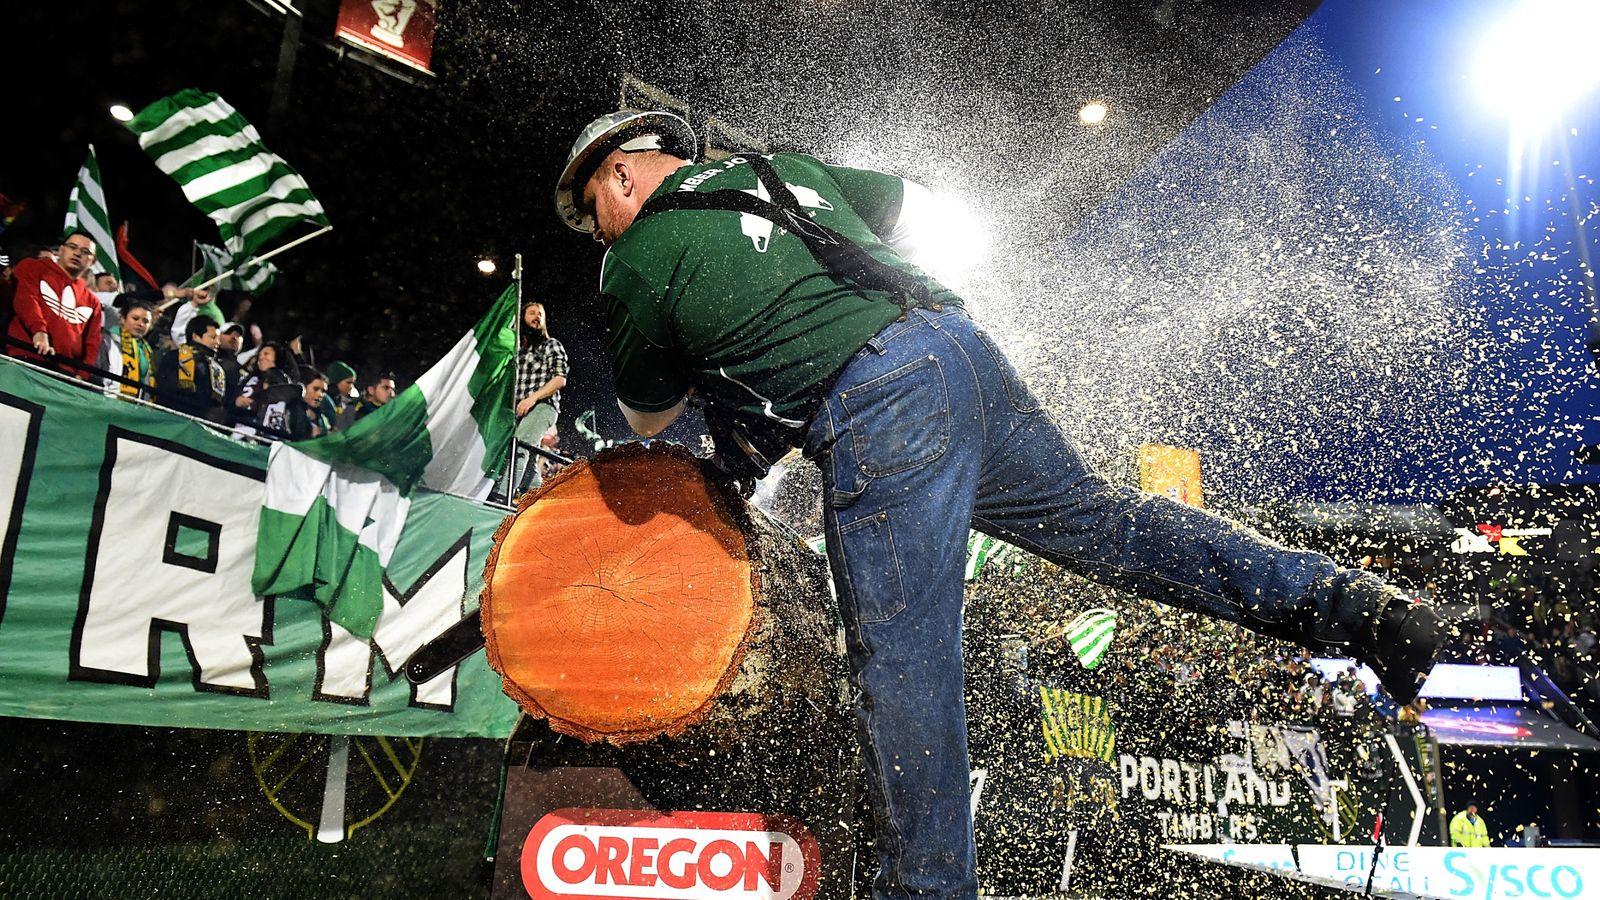 Timber Joey: The Chainsaw-Wielding Mascot of Portland Timbers